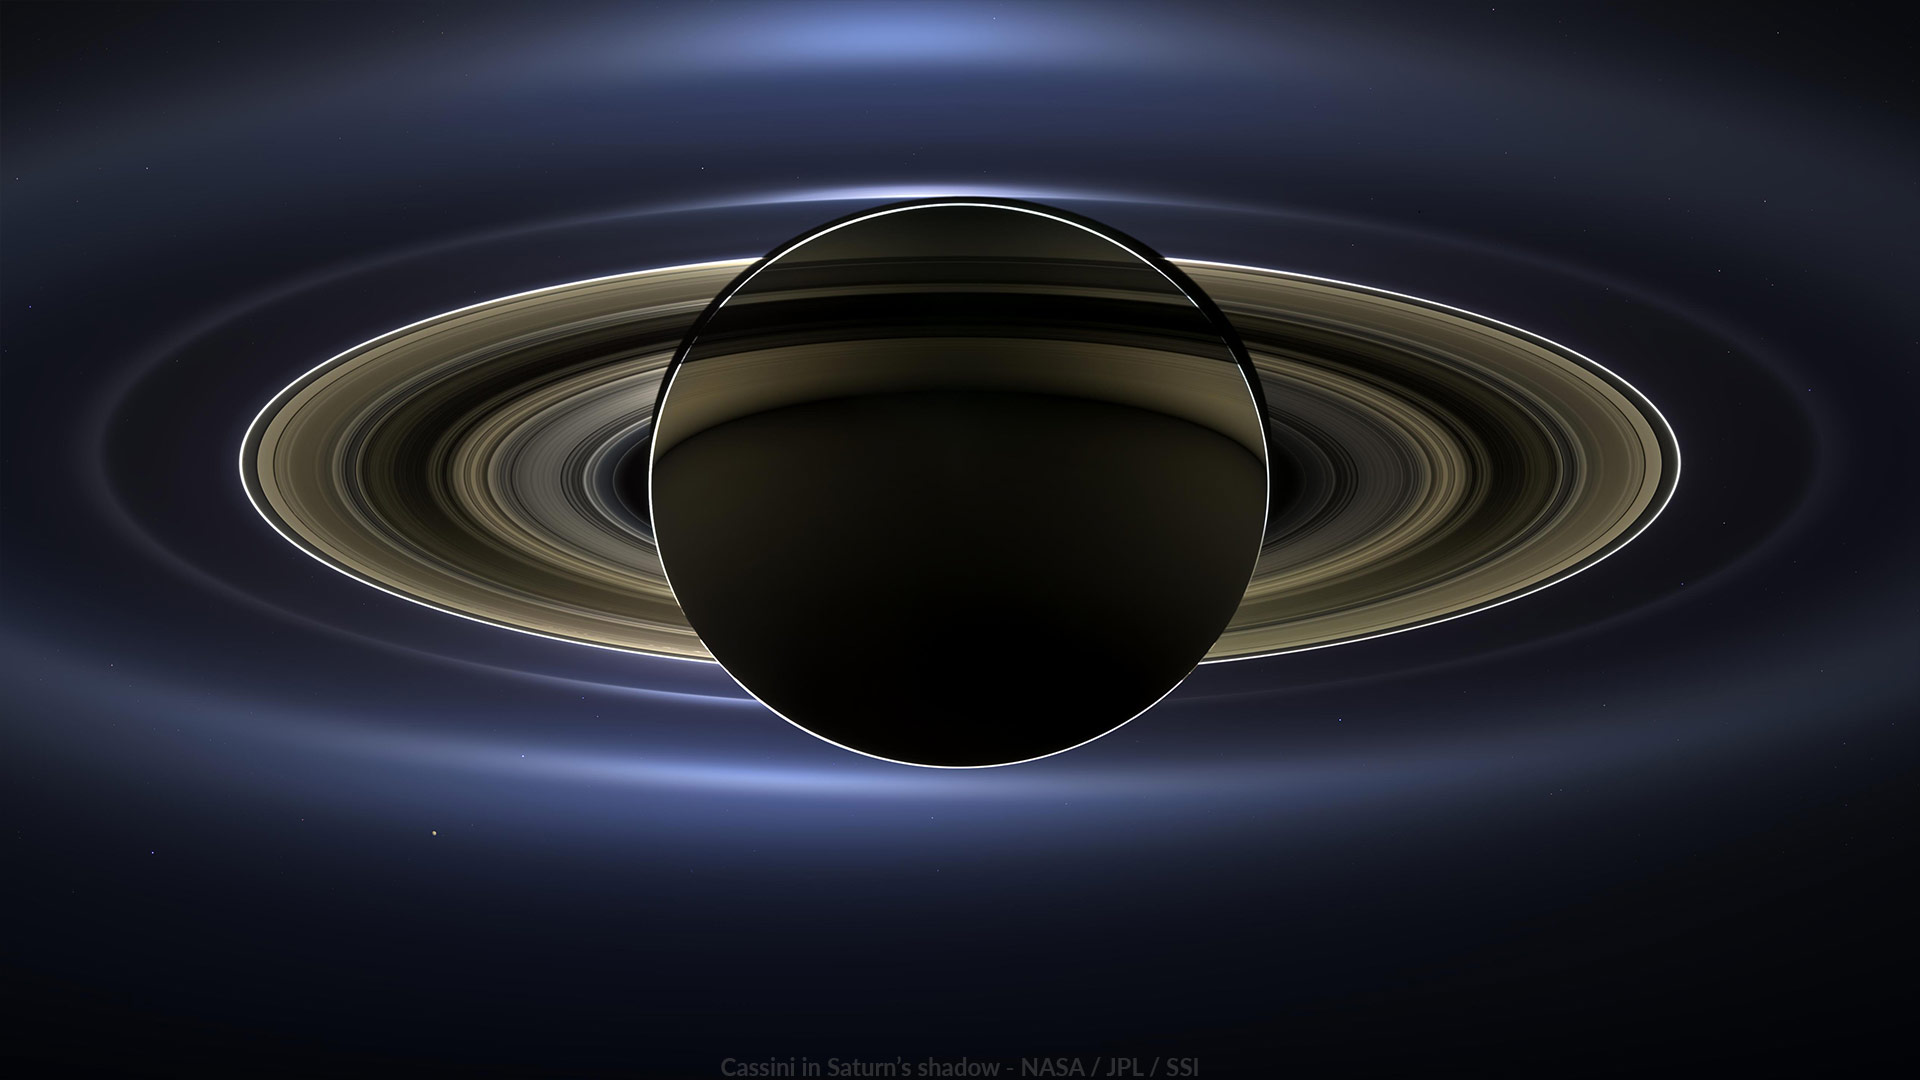 Wallpaper: In Saturn's Shadow (The Day the… | The Planetary Society